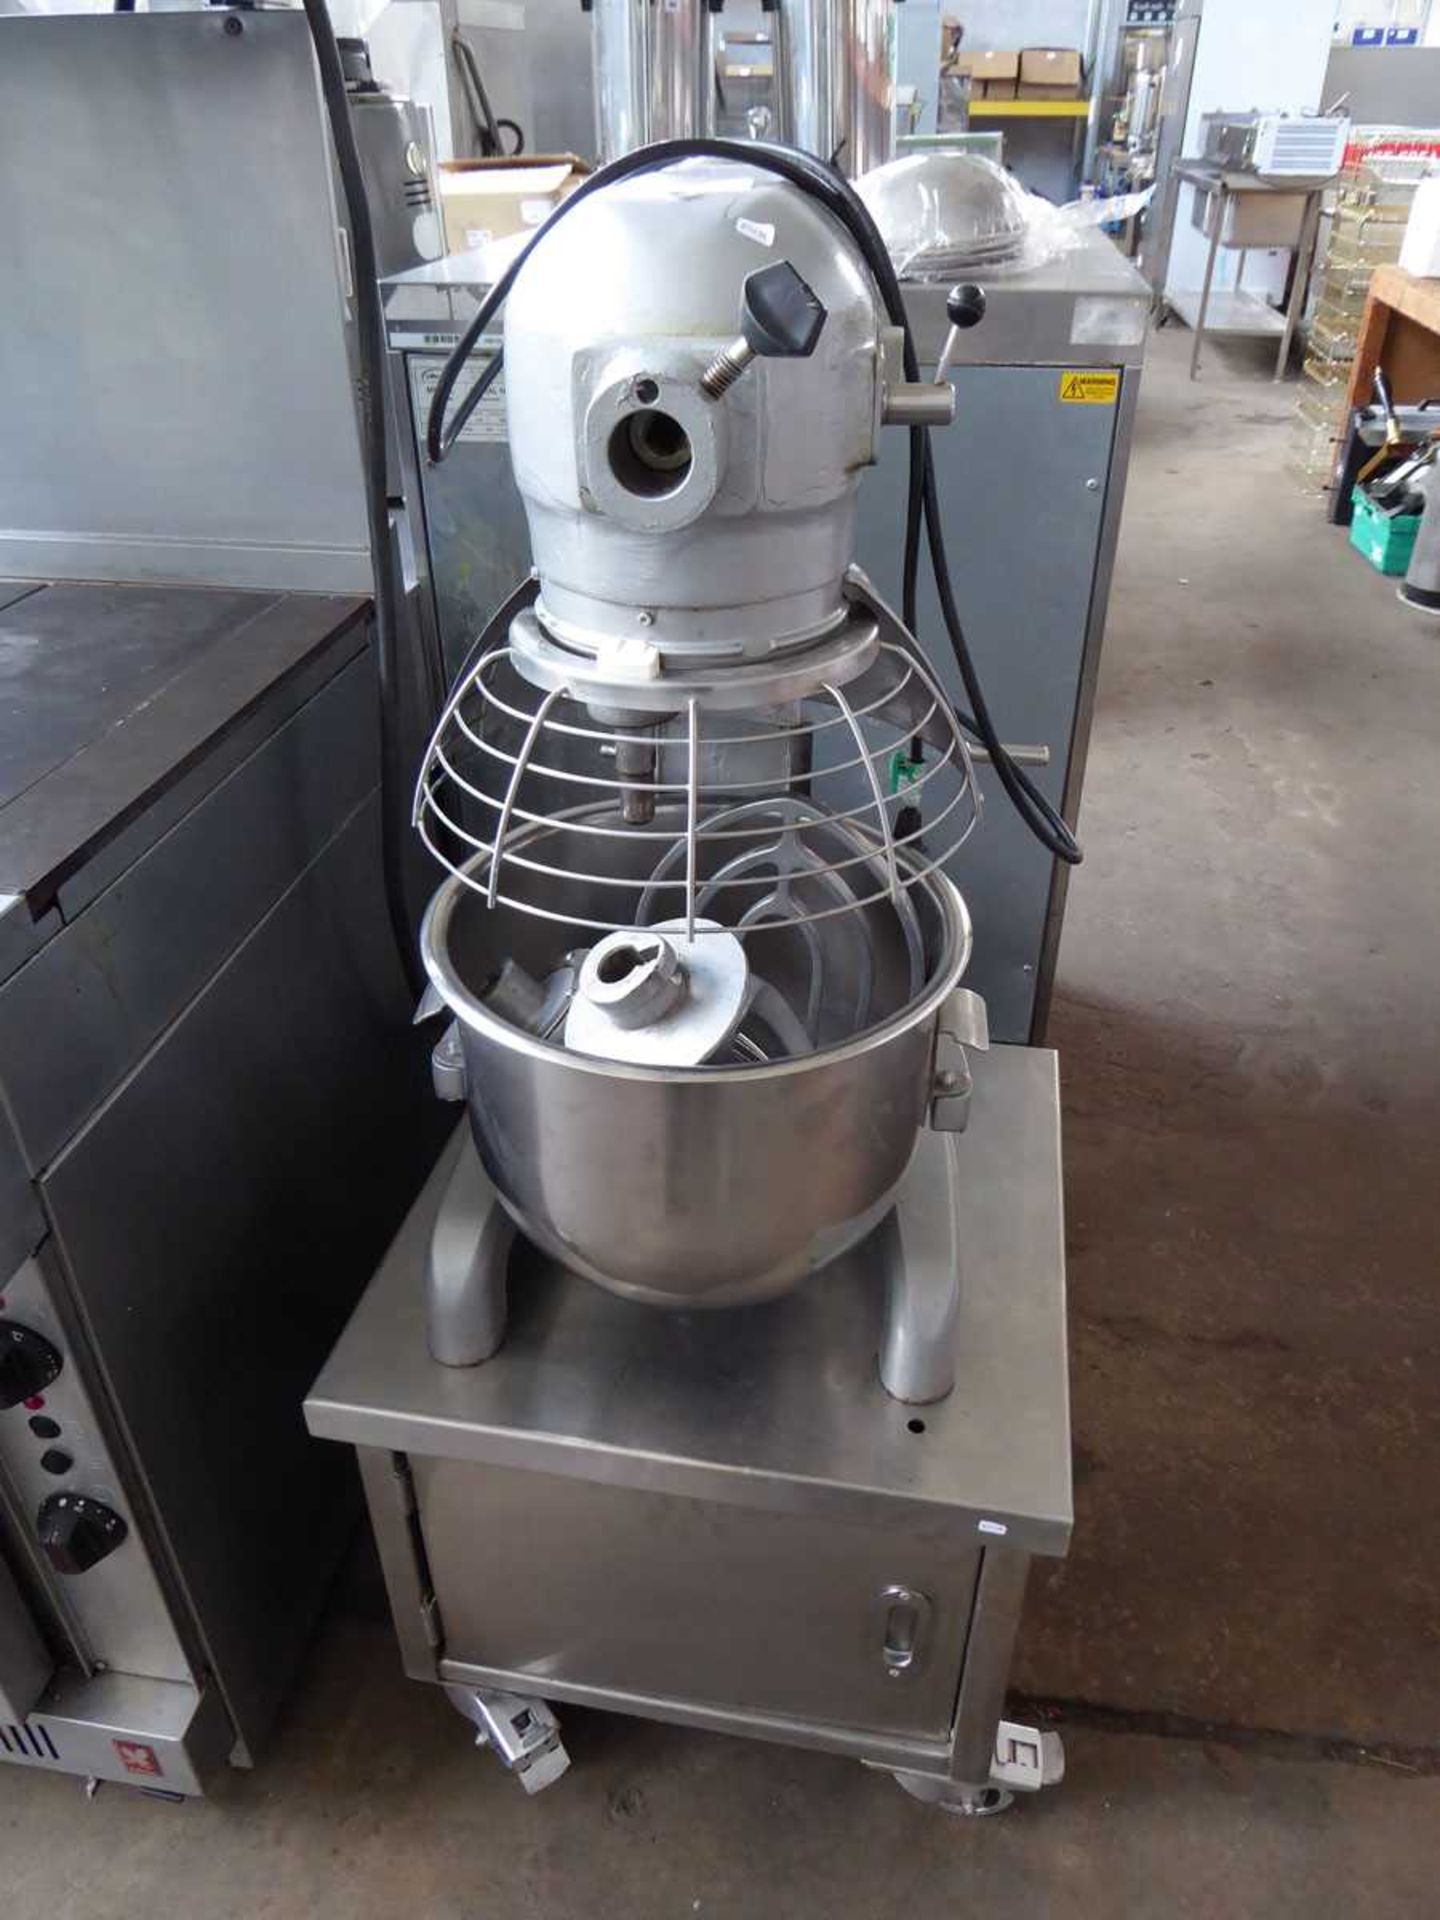 +VAT Hobart model A200 20 quart mixer with bowl, 3 attachments, safety guards and mobile stand